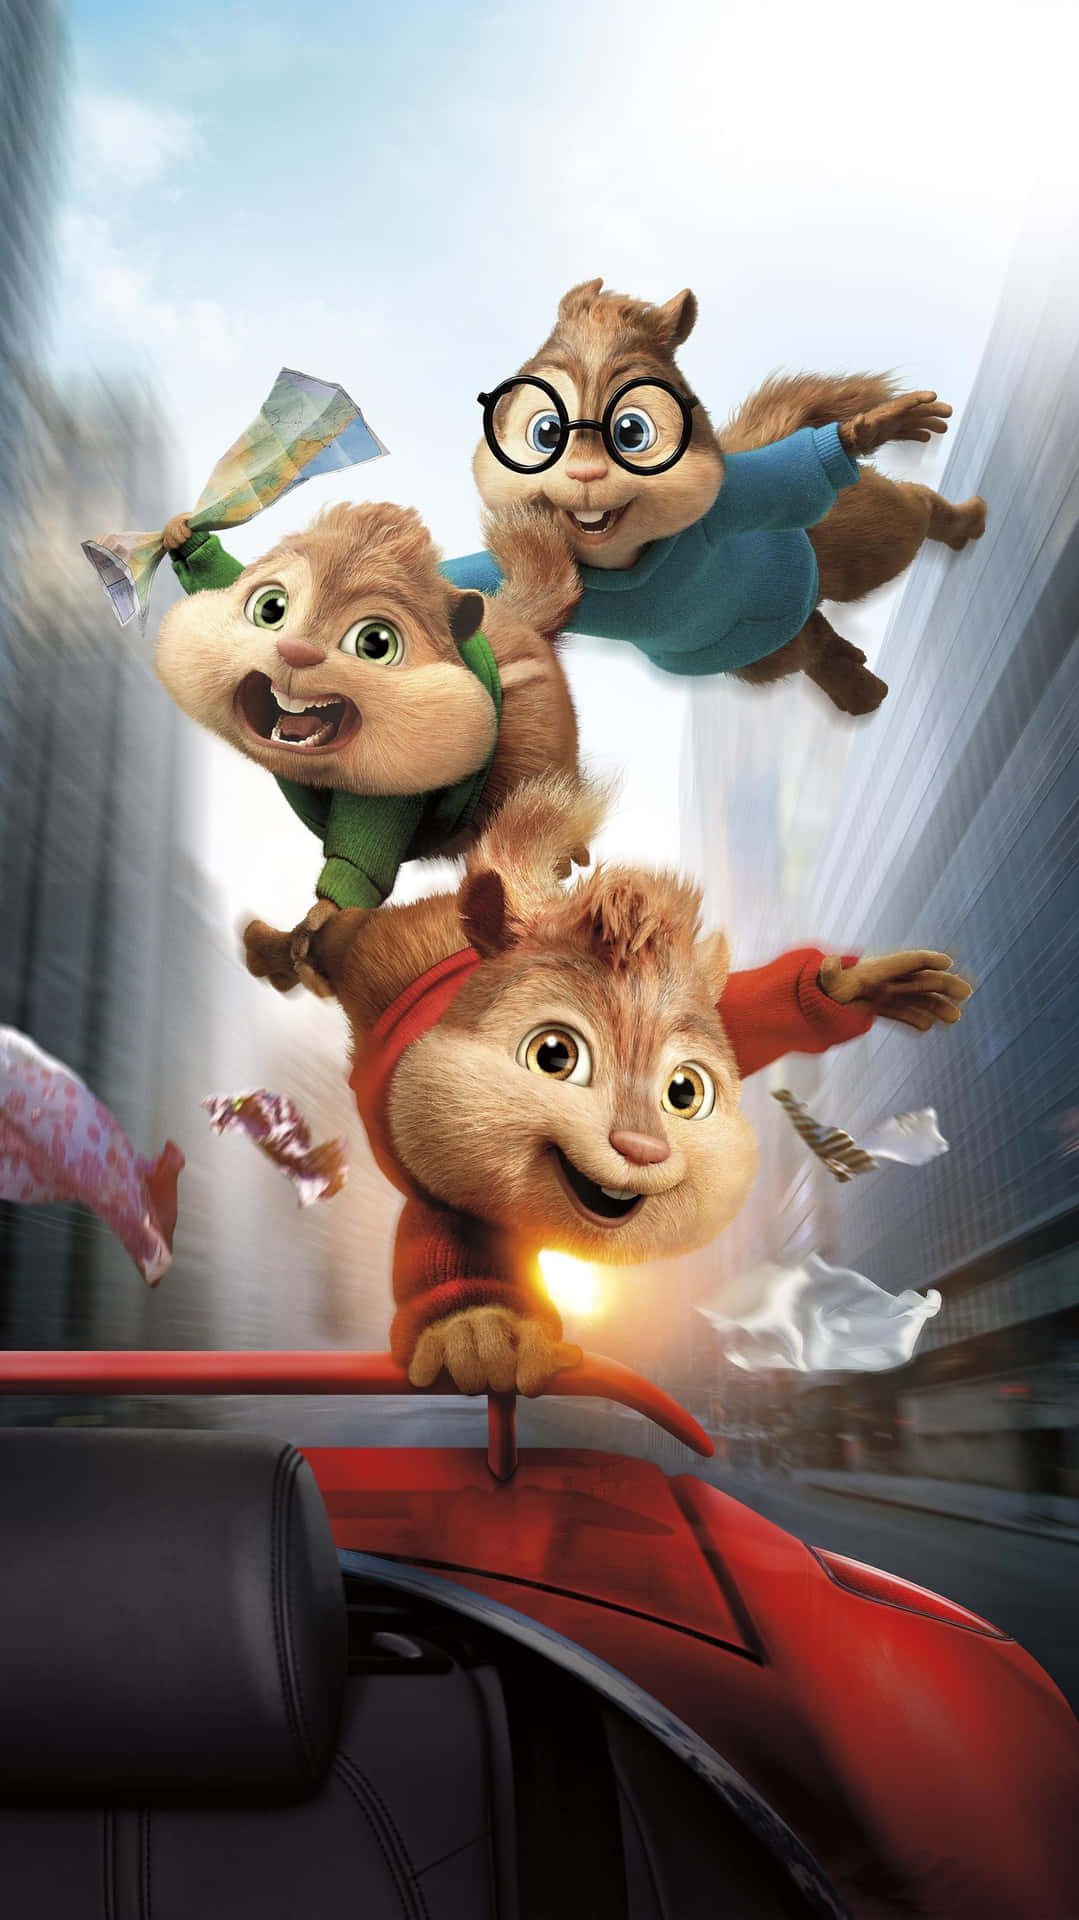 Follow your dreams with Alvin and the Chipmunks!